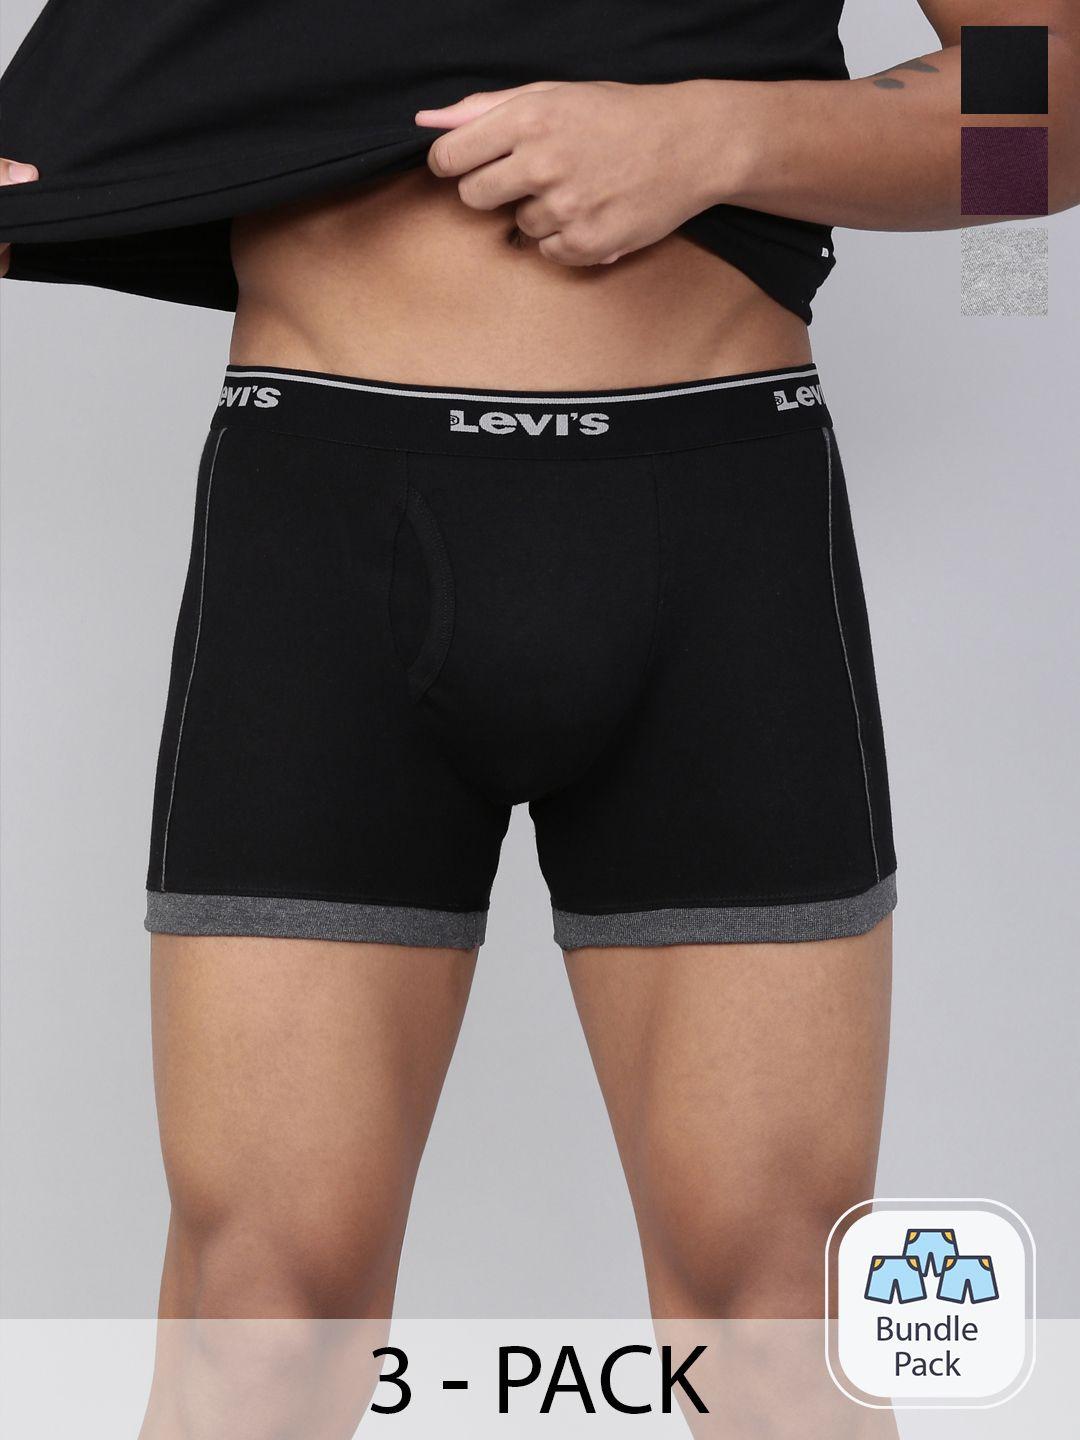 levis men pack of 3 assorted pure cotton trunks style-007a_3-assorted